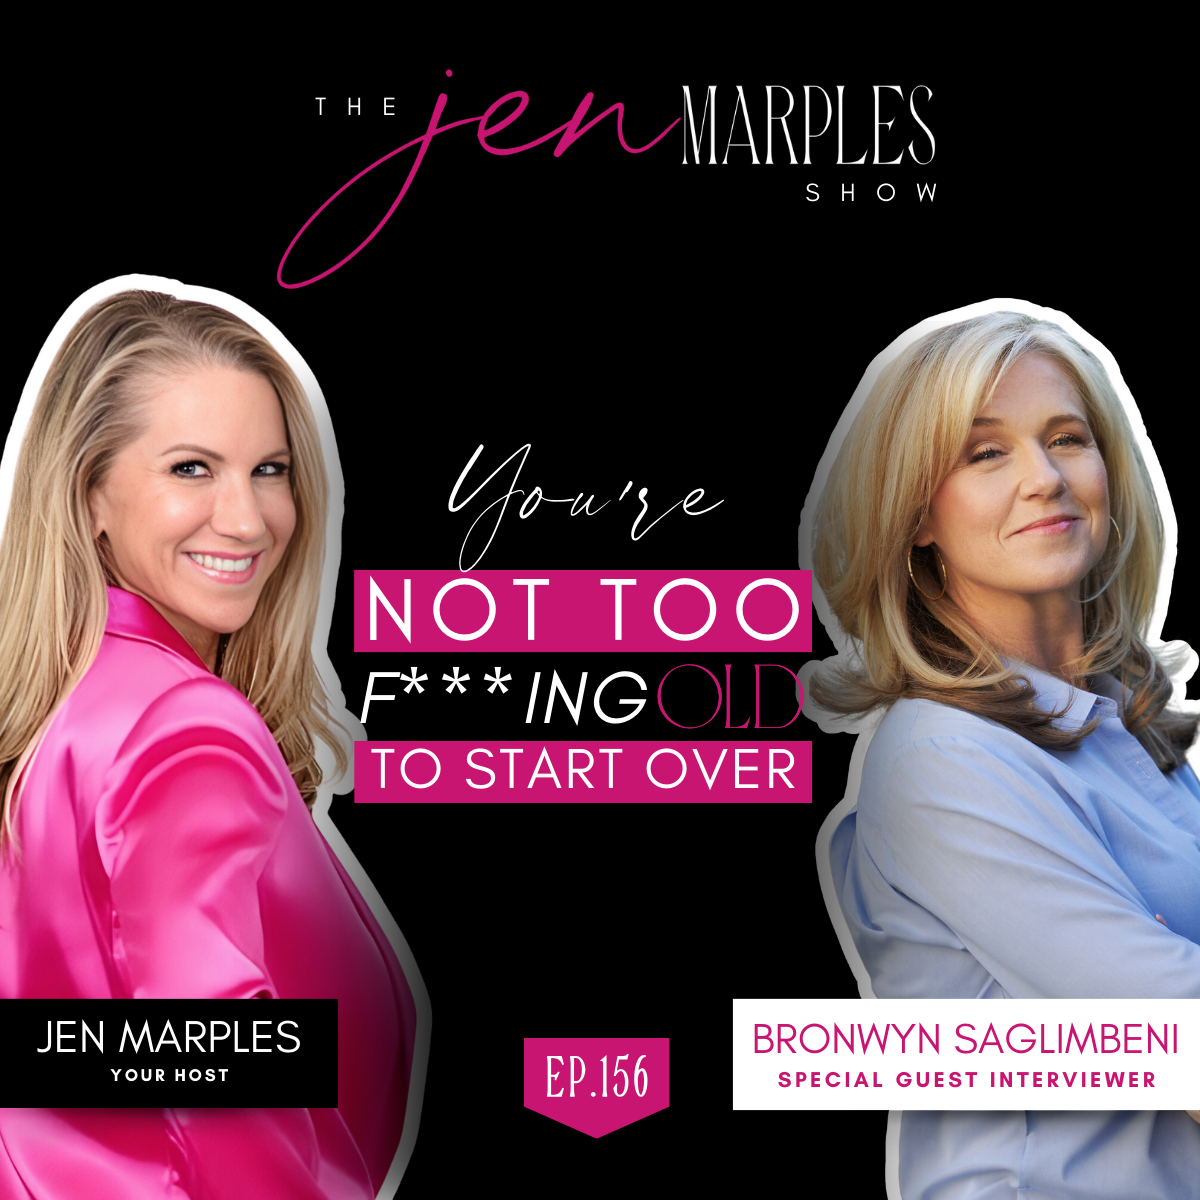 You're Not Too F***ing Old! to Start Over: Jen's in the Hot Seat Today with Guest Interviewer Bronwyn Saglimbeni